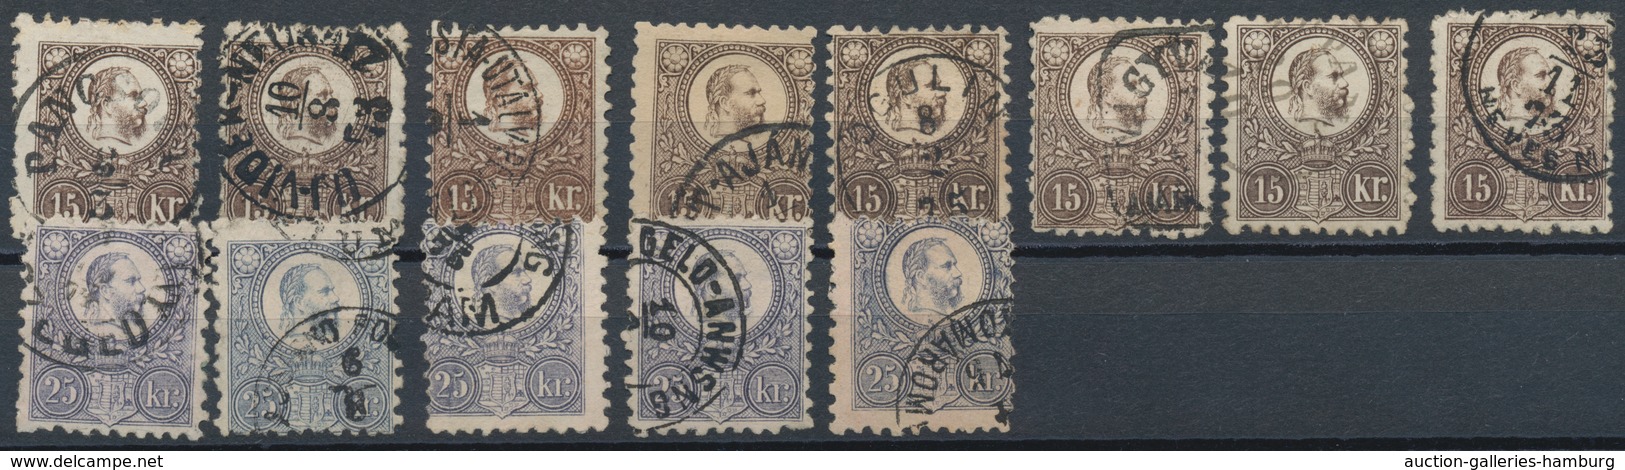 Ungarn: 1871 'King Franz Josef': 45 Used Stamps Of All Denominations, Including Lithographs, Colour - Briefe U. Dokumente